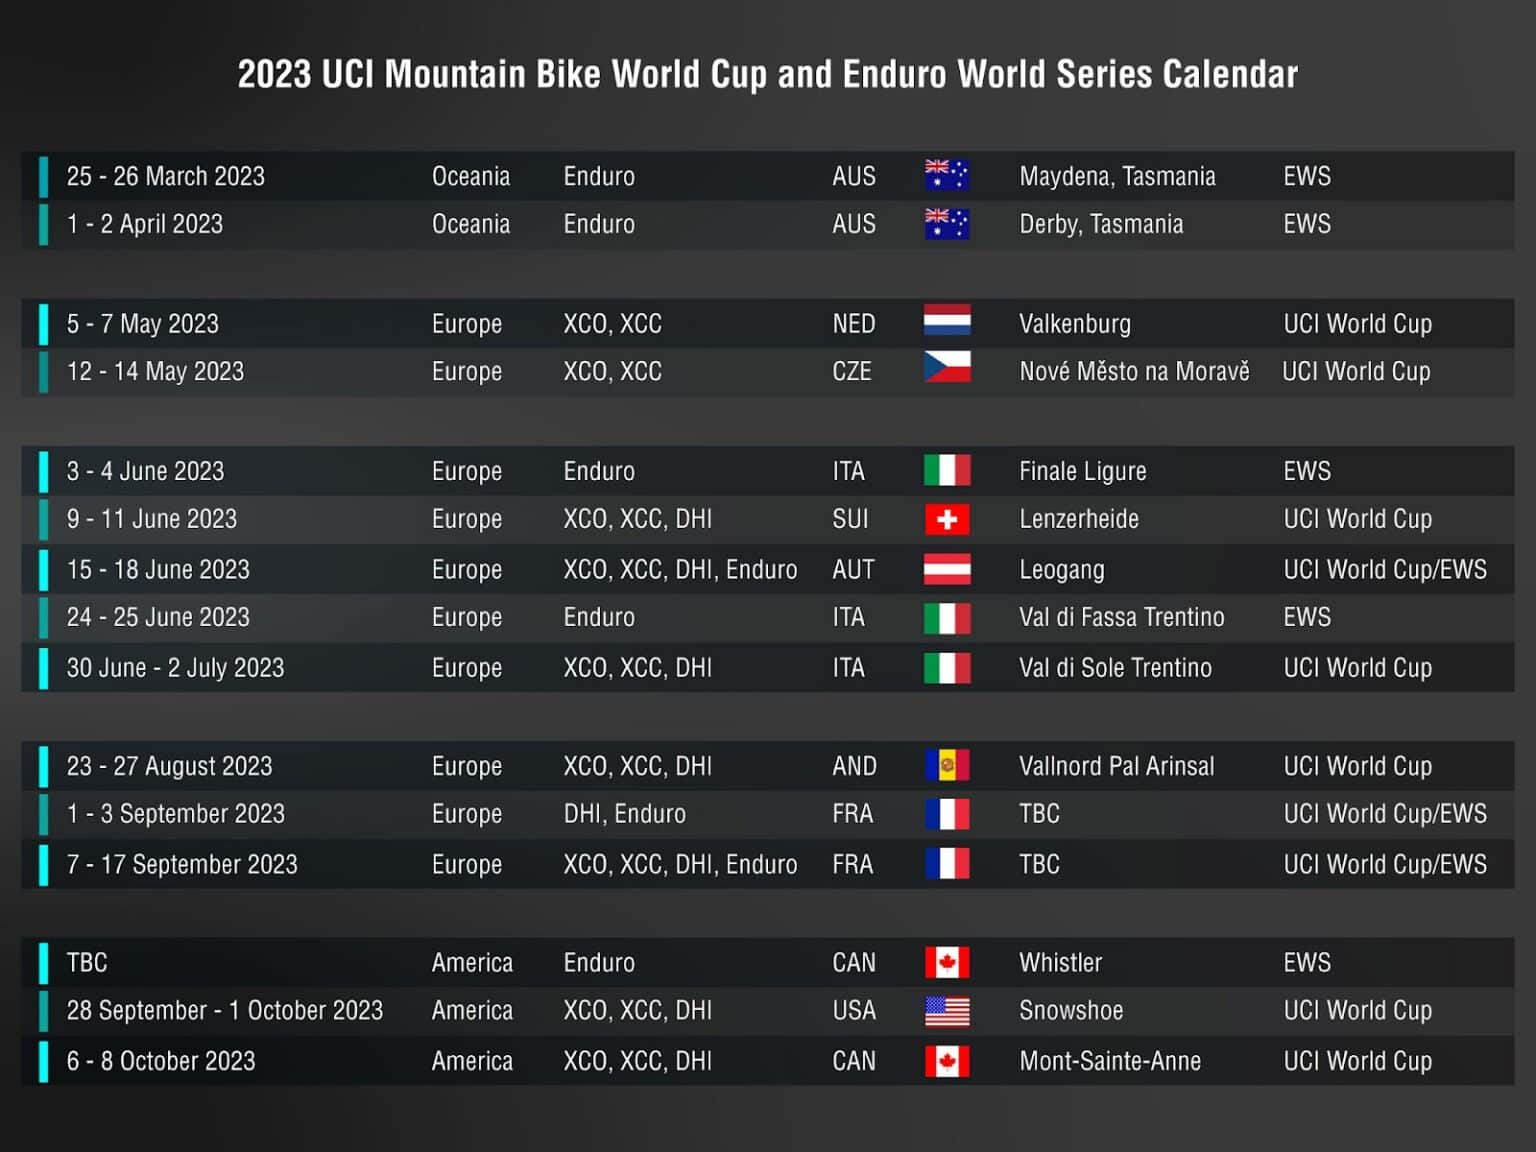 2023 Combined UCI World Cup And Enduro World Series Calendar Unveiled